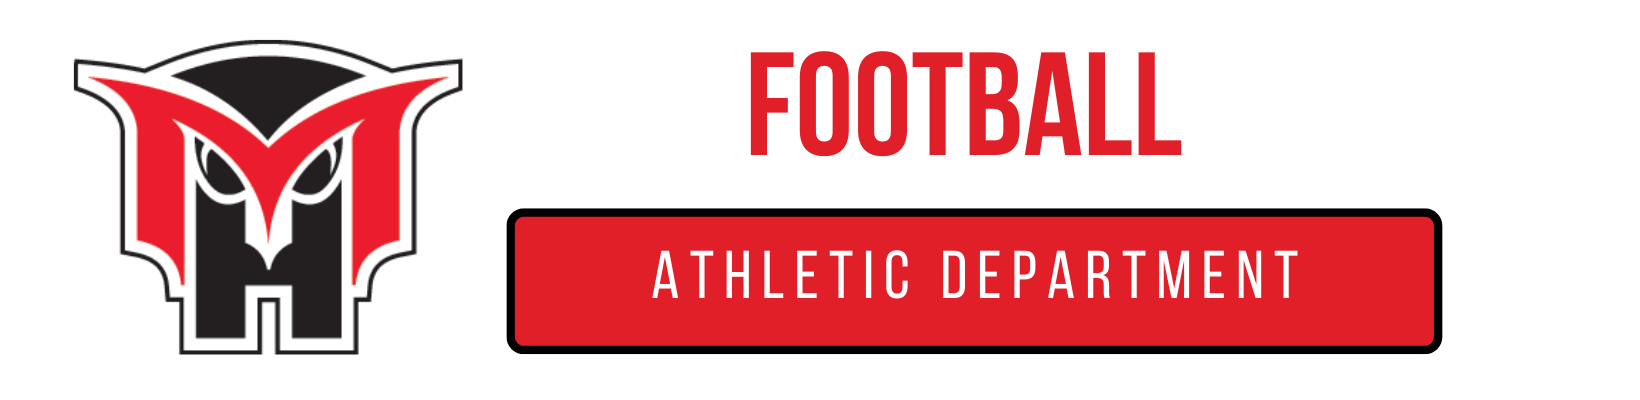 athletic department - football